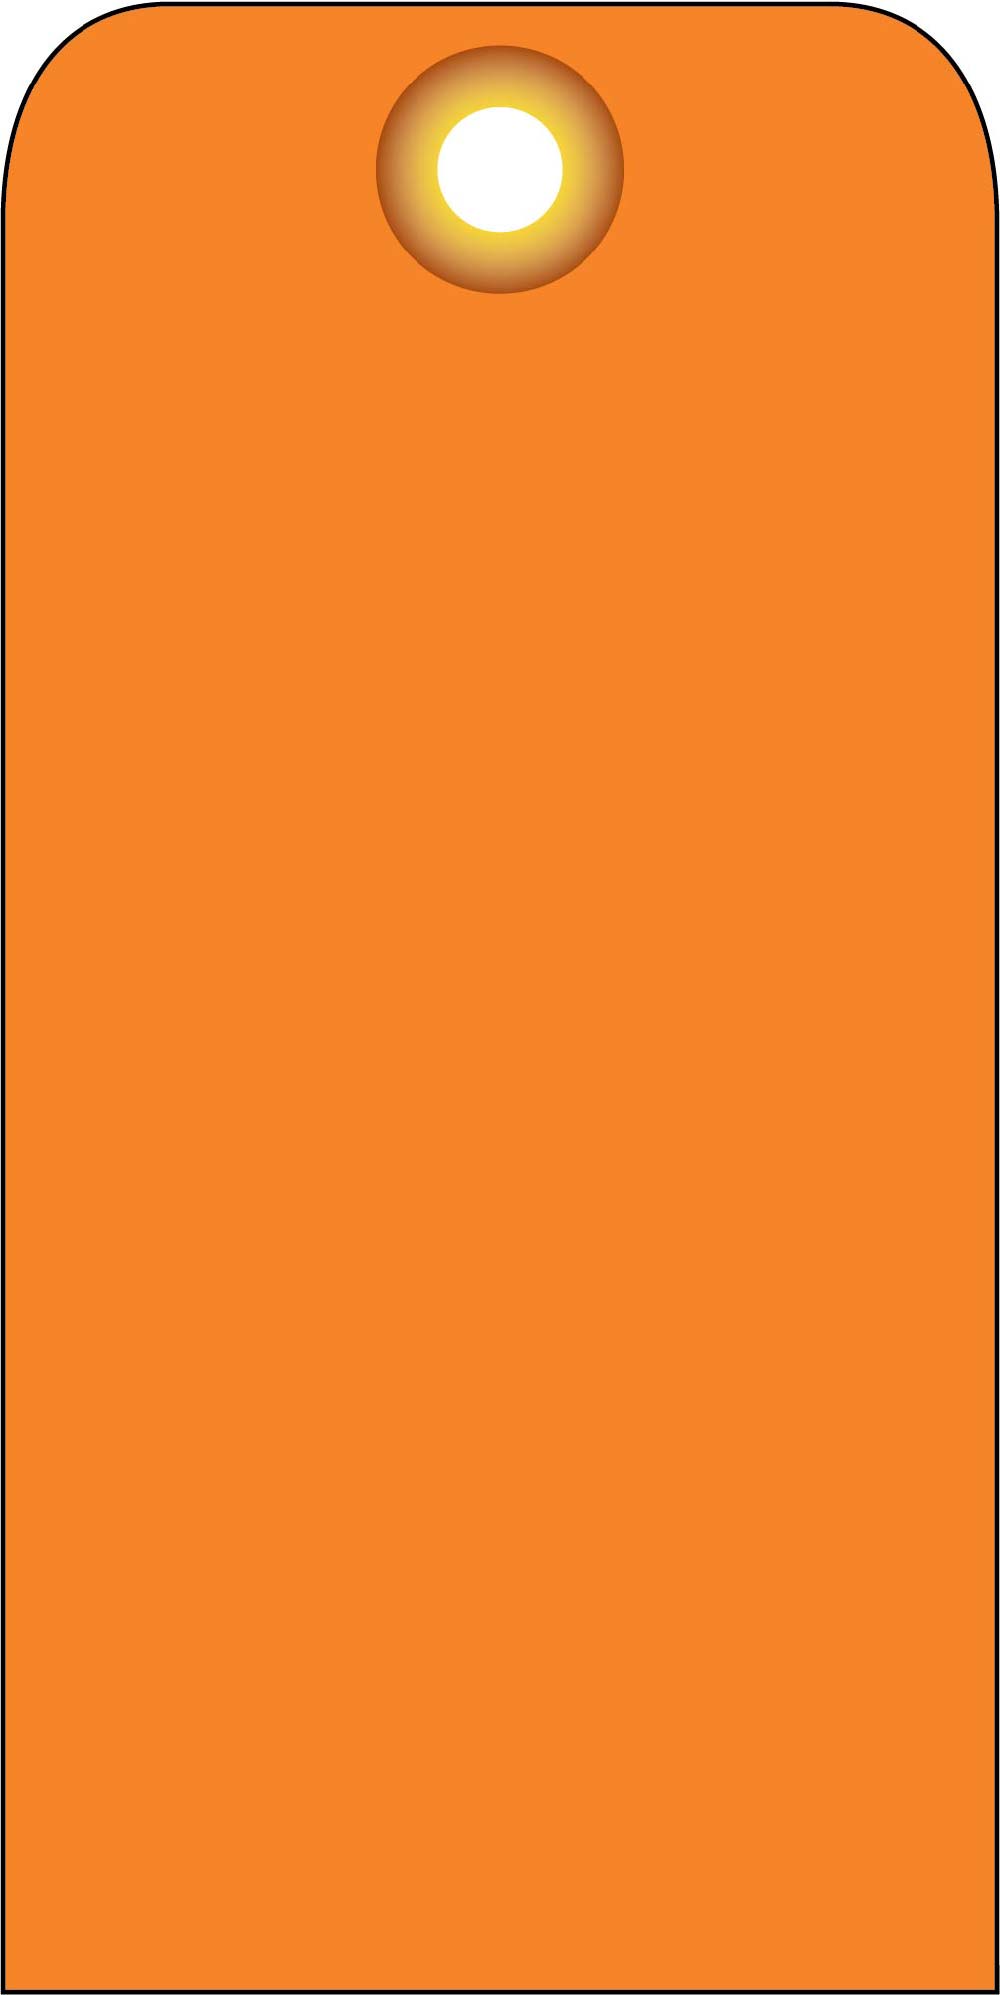 Blank Tag Orange - Pack of 25-eSafety Supplies, Inc